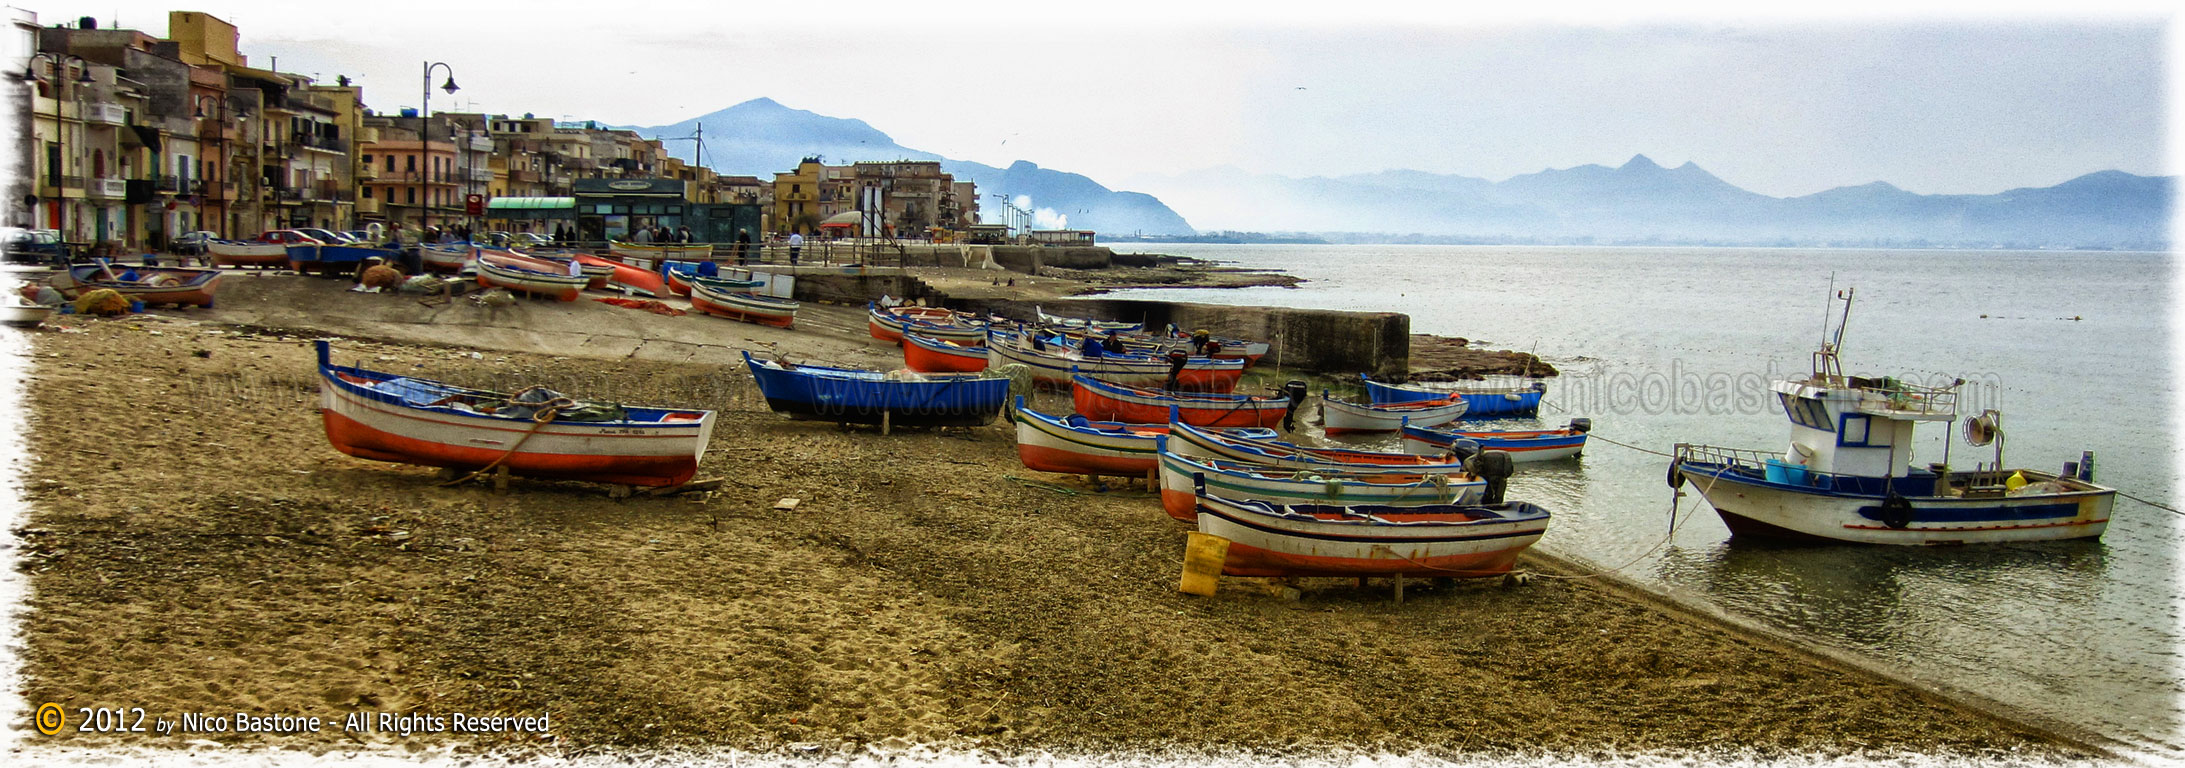 Aspra, Bagheria PA "Panorama con barche - A large view with boats 2185x768"